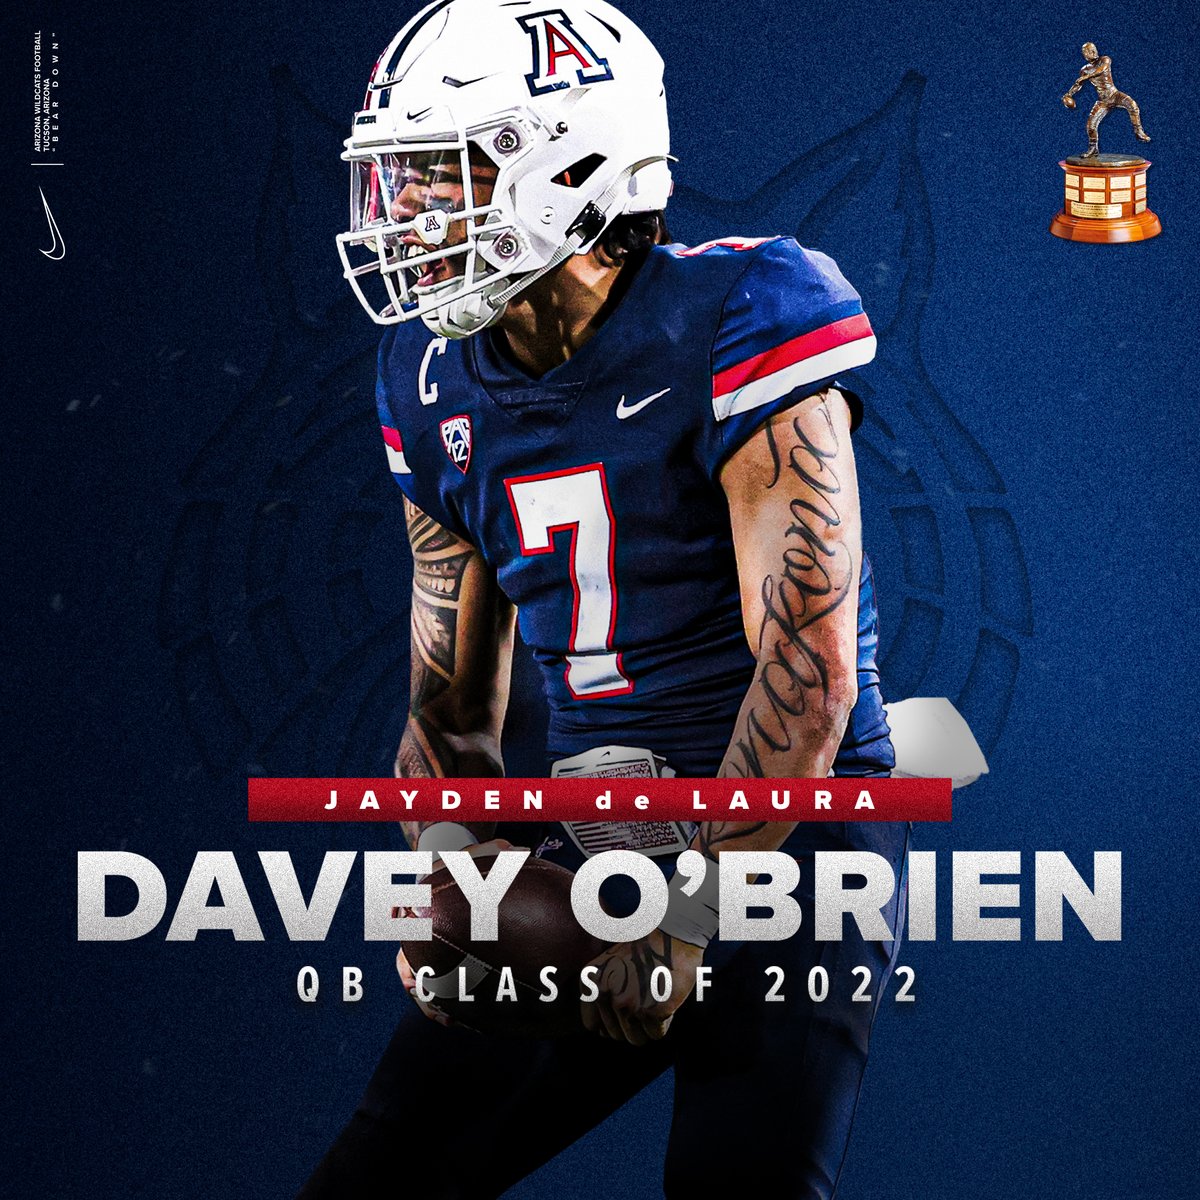 Congratulations to @jayden_delaura on being named a member of the Davey O 'Brien QB Class of 2022! 🏈 #ItsPersonal | #RiseWithUs